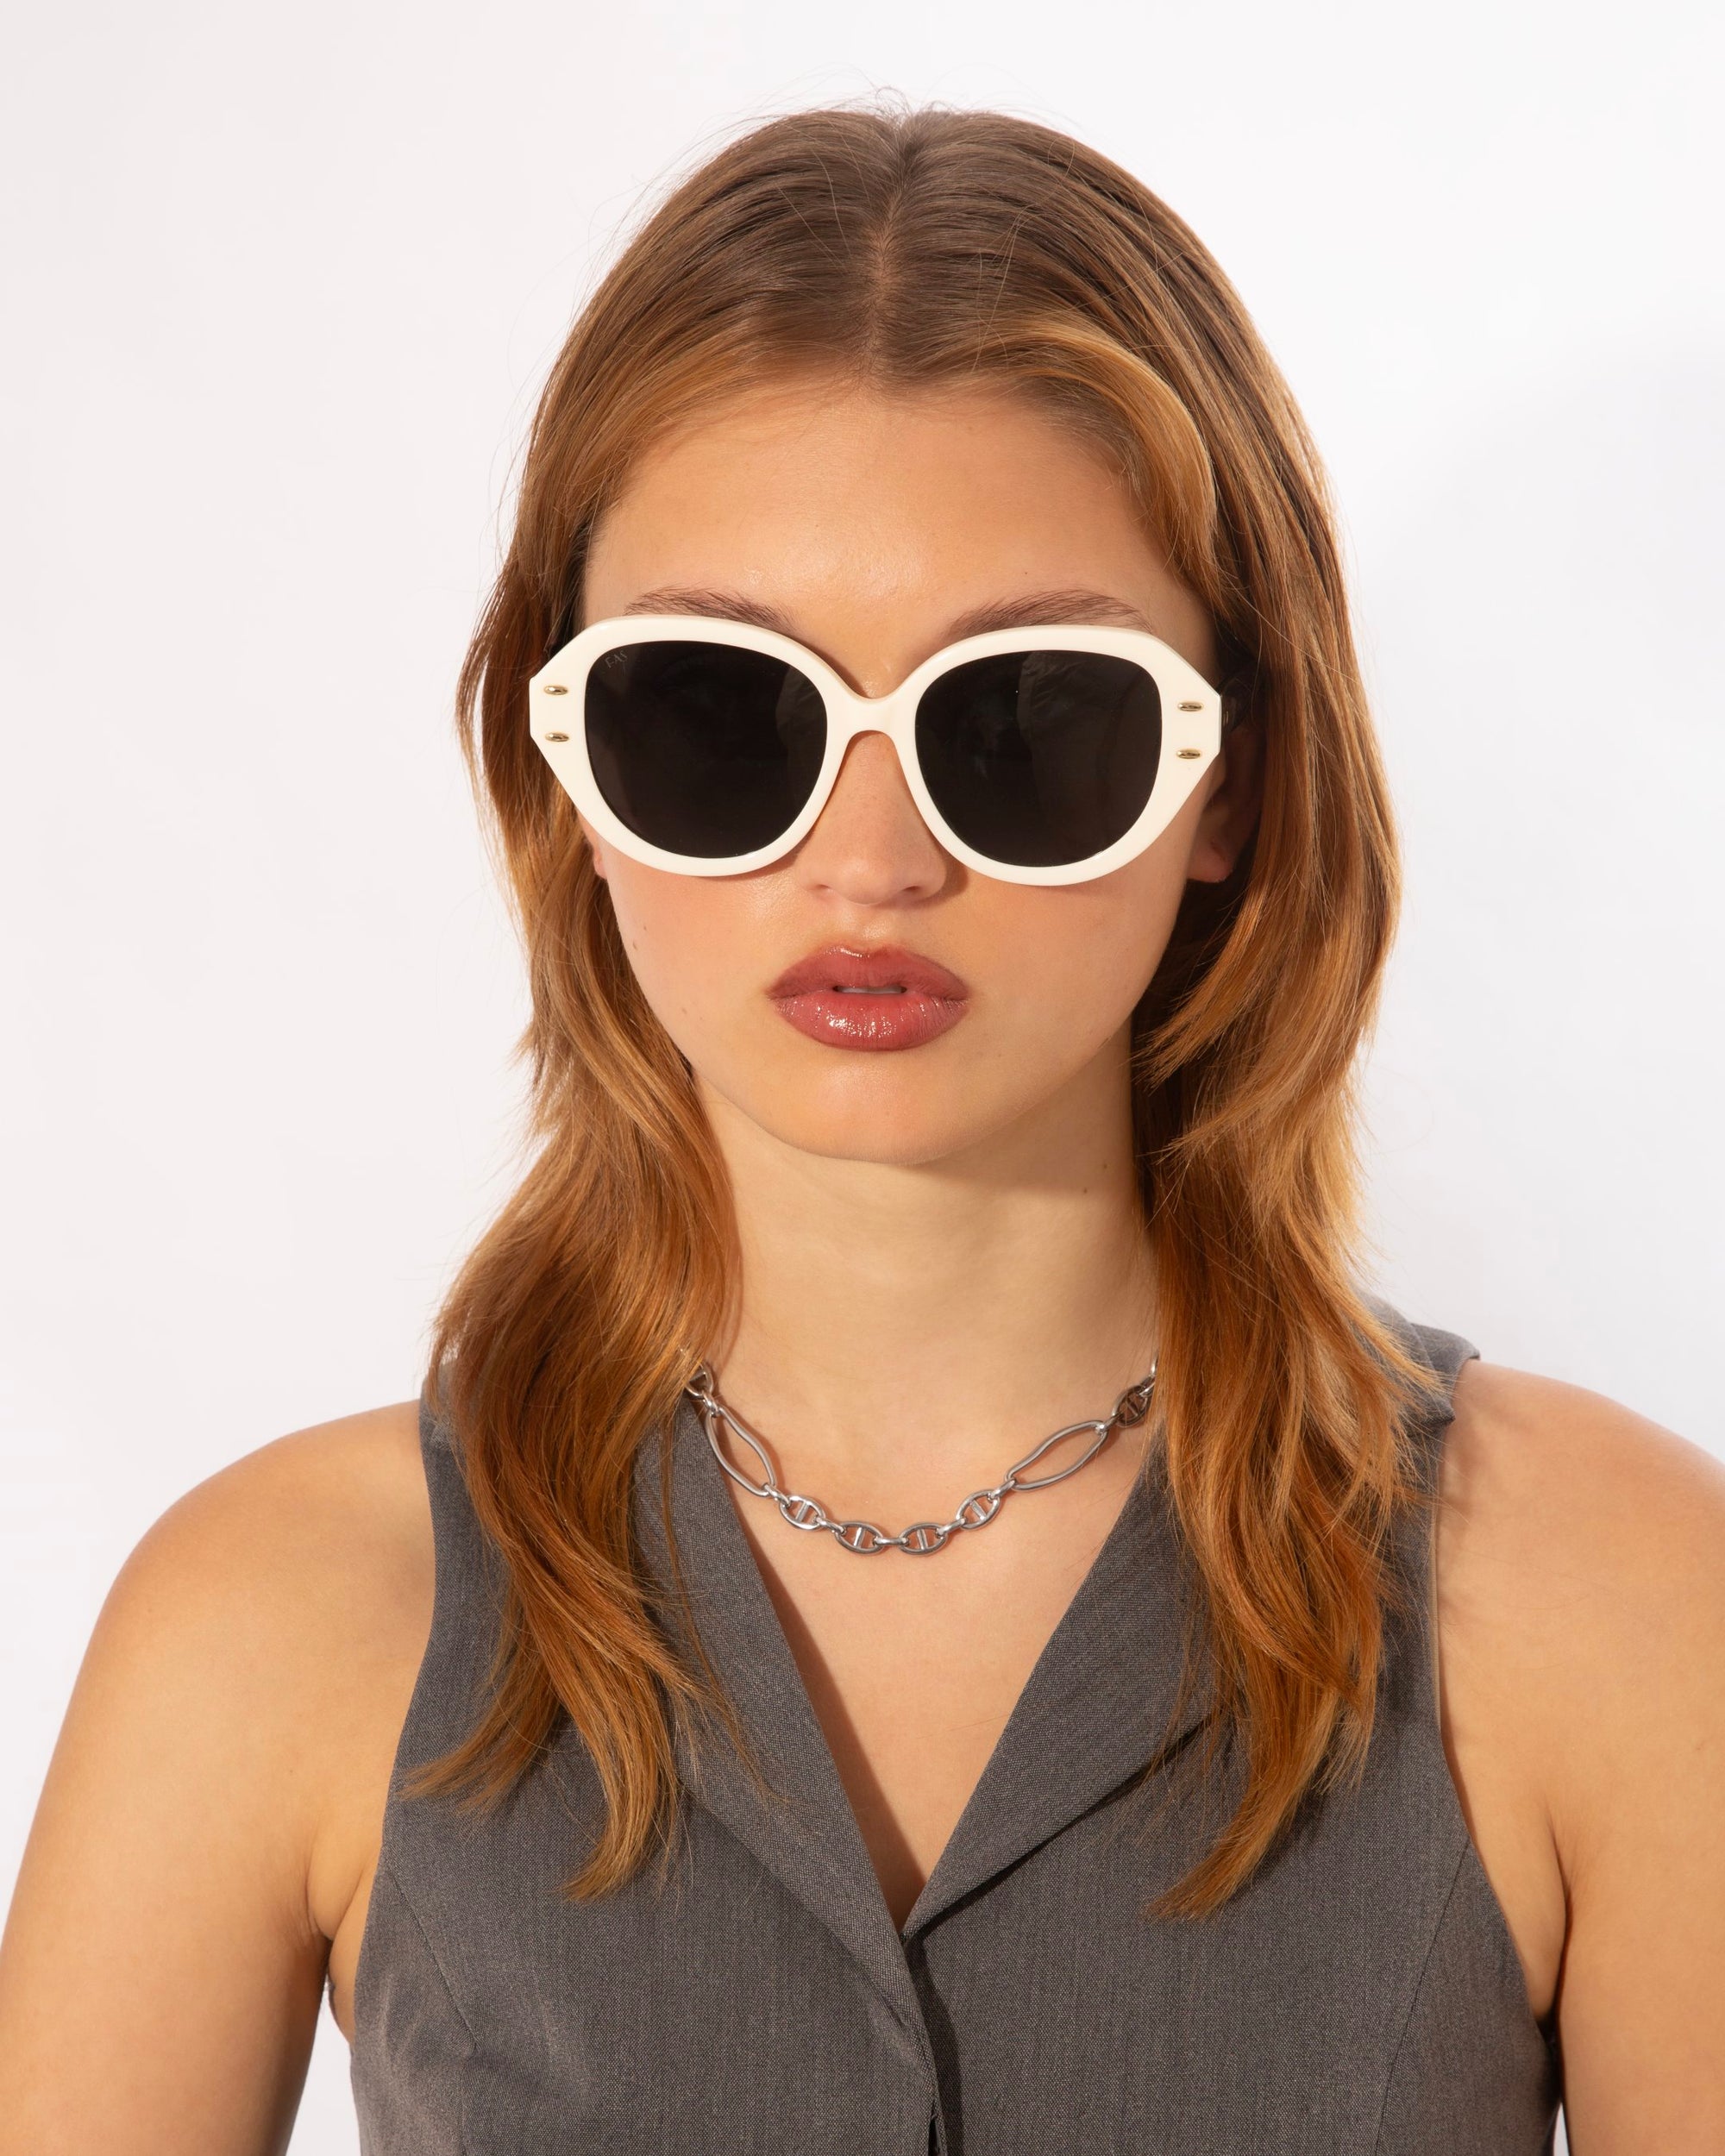 A person with shoulder-length light brown hair is wearing large white-framed Mirage sunglasses from For Art&#39;s Sake® made from plant-based acetate and a sleeveless charcoal gray top. They also have a silver chain necklace. The background is plain white.